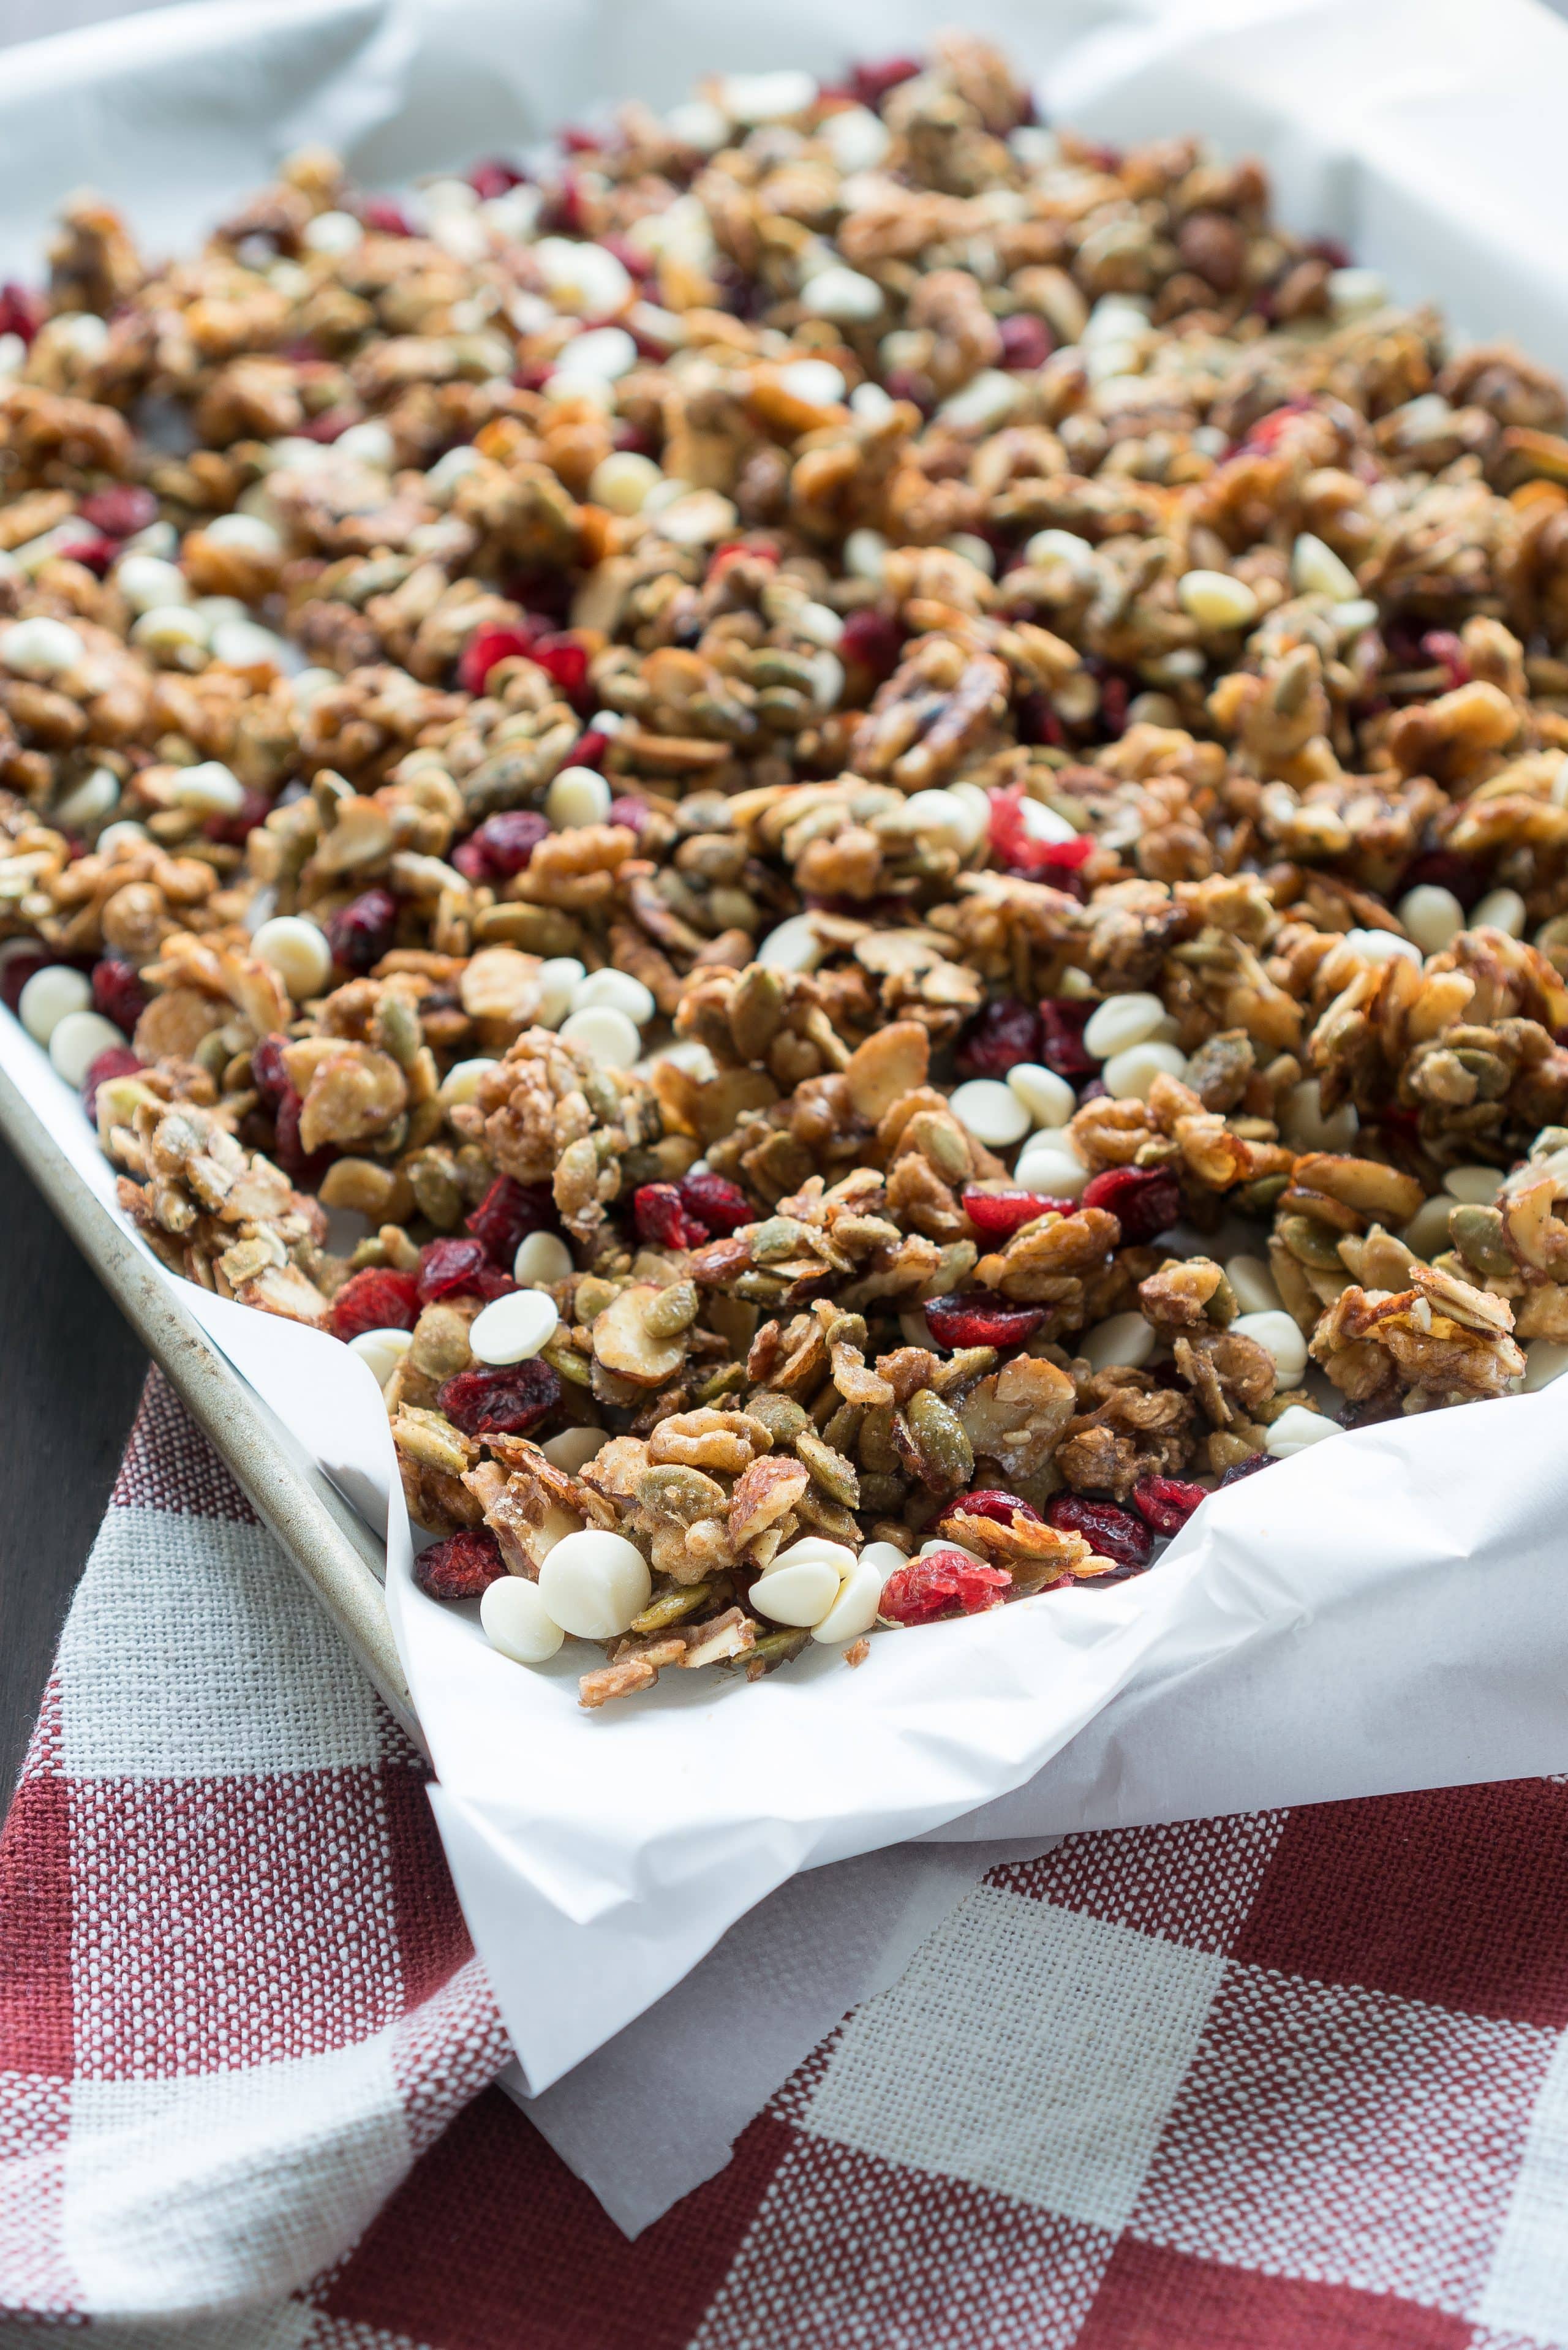 Cranberry Maple Trail Mix – Easy recipe for cinnamon-spiced Cranberry Maple Trail Mix! Walnuts, pumpkin seeds, & almonds are lightly glazed in maple syrup & brown sugar. With lots of tart dried cranberries & white chocolate chips folded in. We love this as a sweet snack on-the-go or homemade holiday gift! ♥ | freeyourfork.com